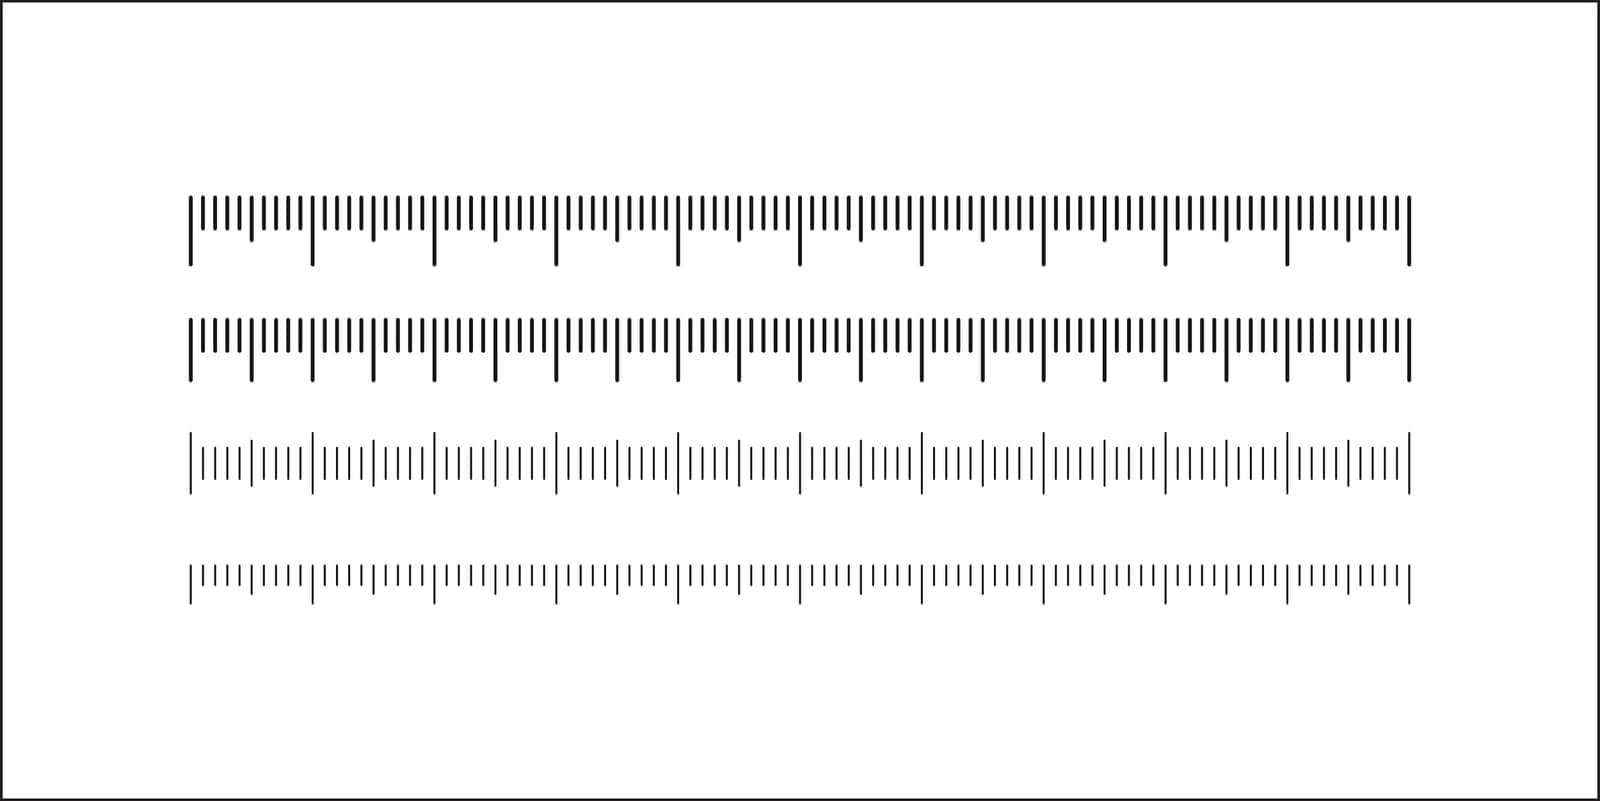 Ruler scale measure or vector length measurement scale chart by evgkhad